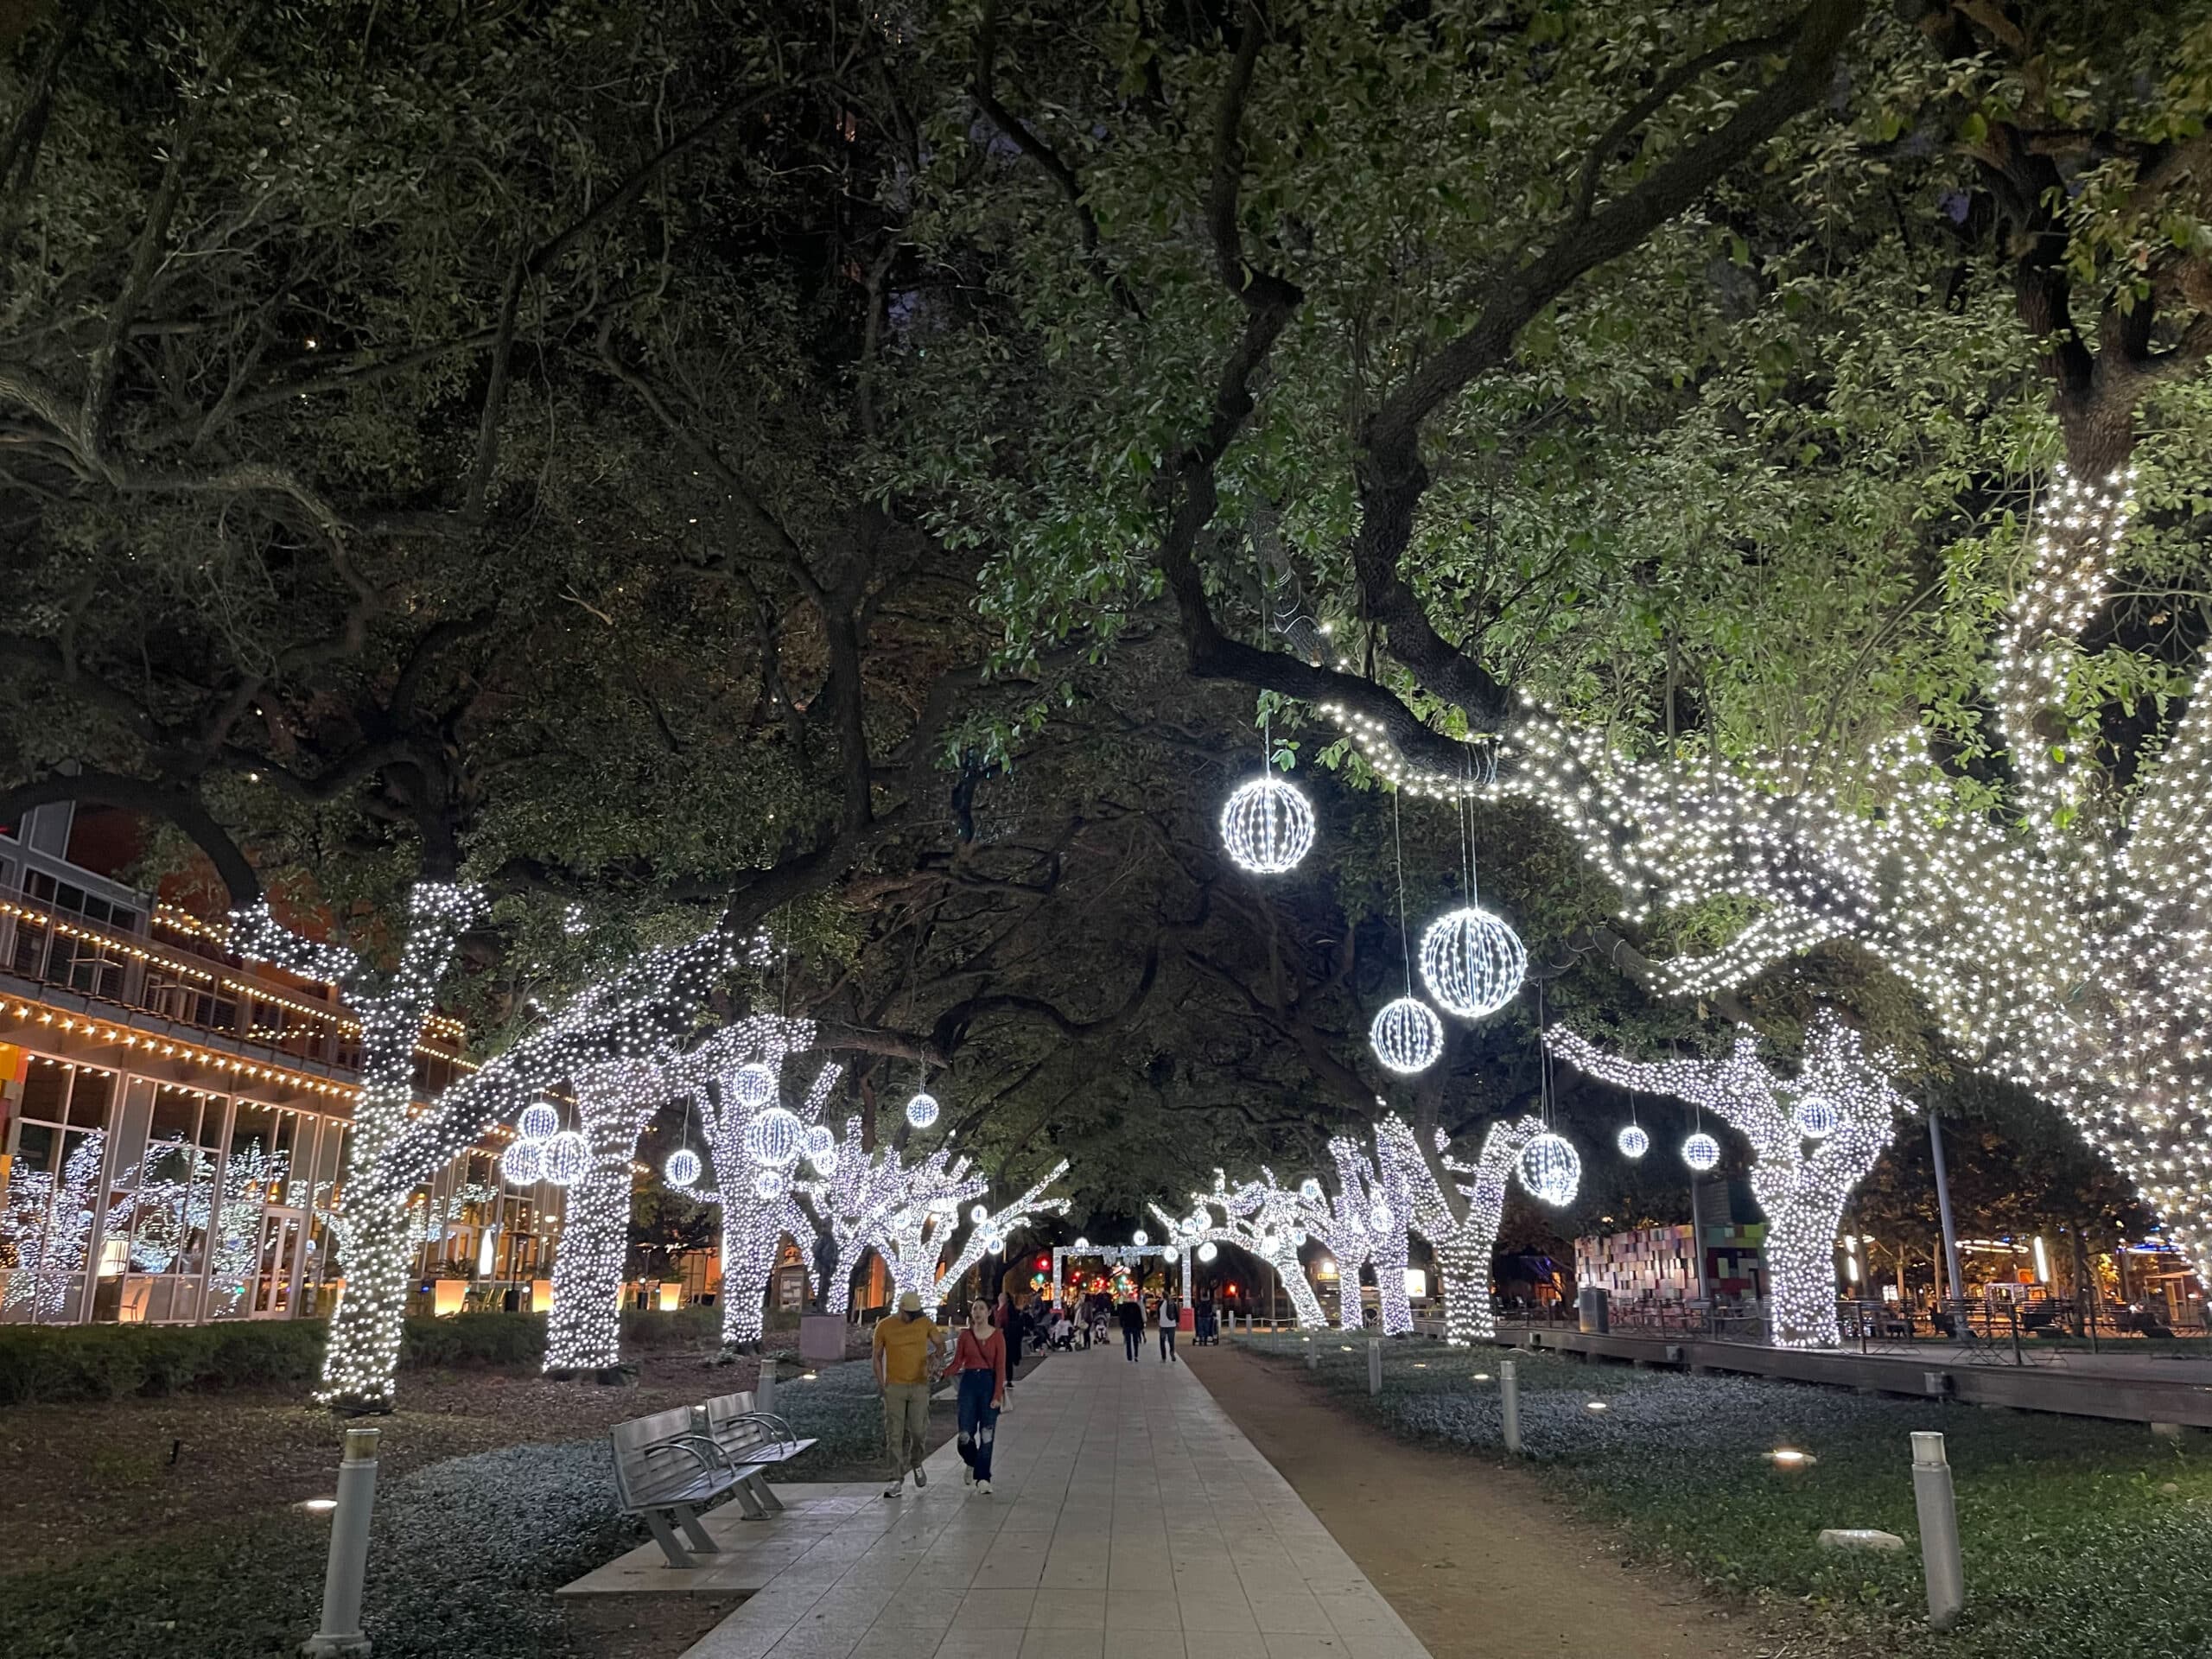 Winter White Lights at Discovery Green presented by PNC Bank. The trees are decorated with festive holiday lights for the season.